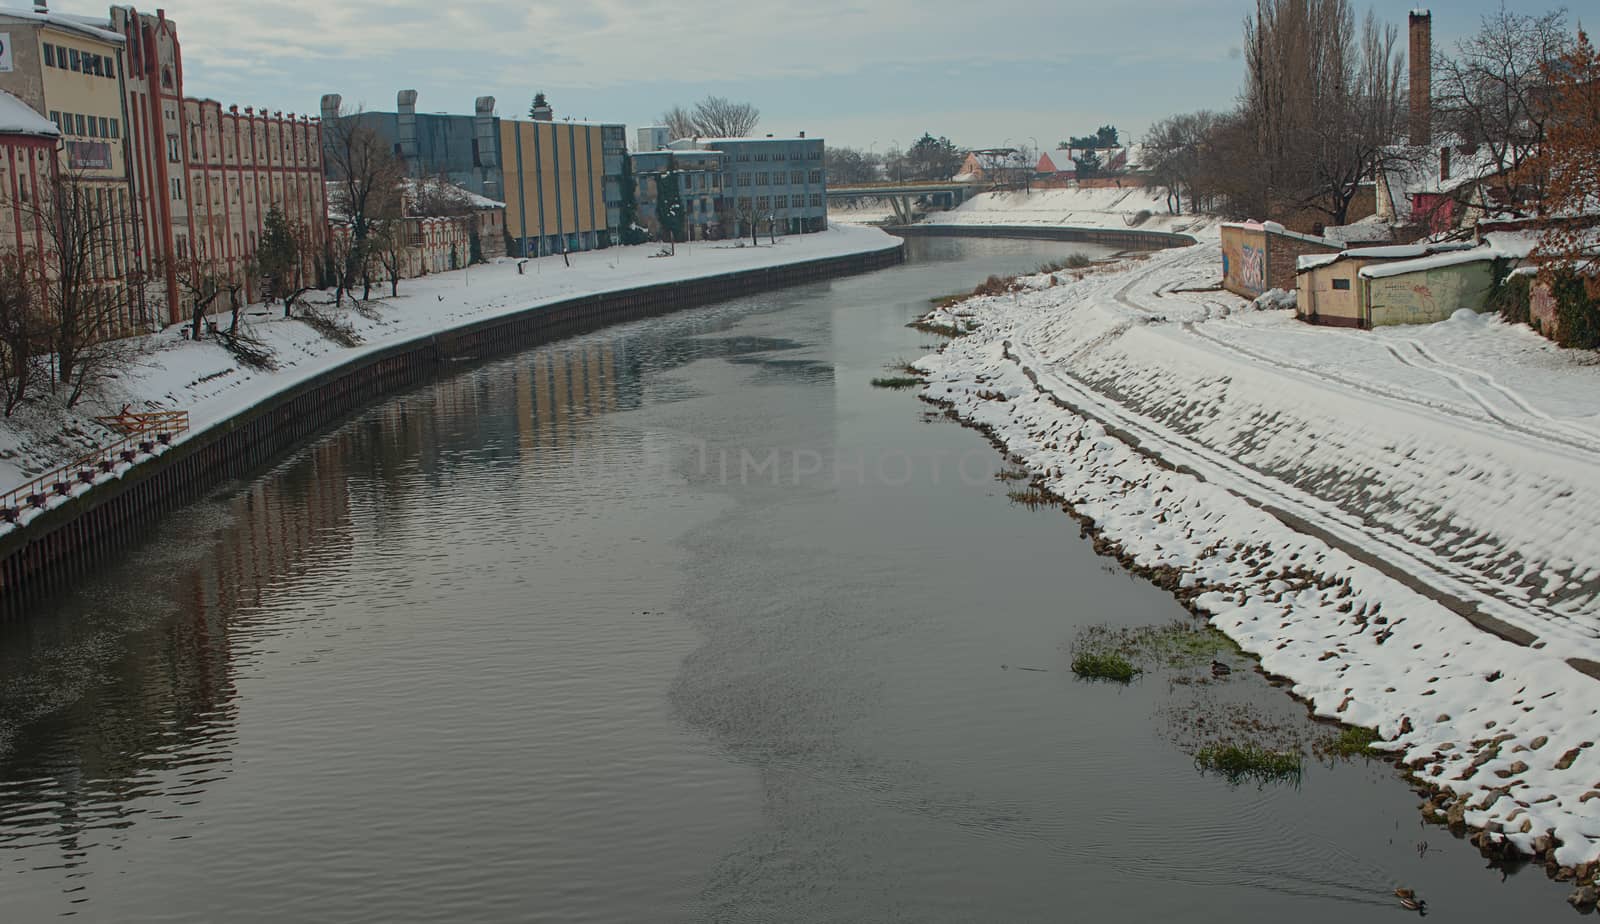 View on Begej river in Zrenjanin, Serbia during winter time by sheriffkule